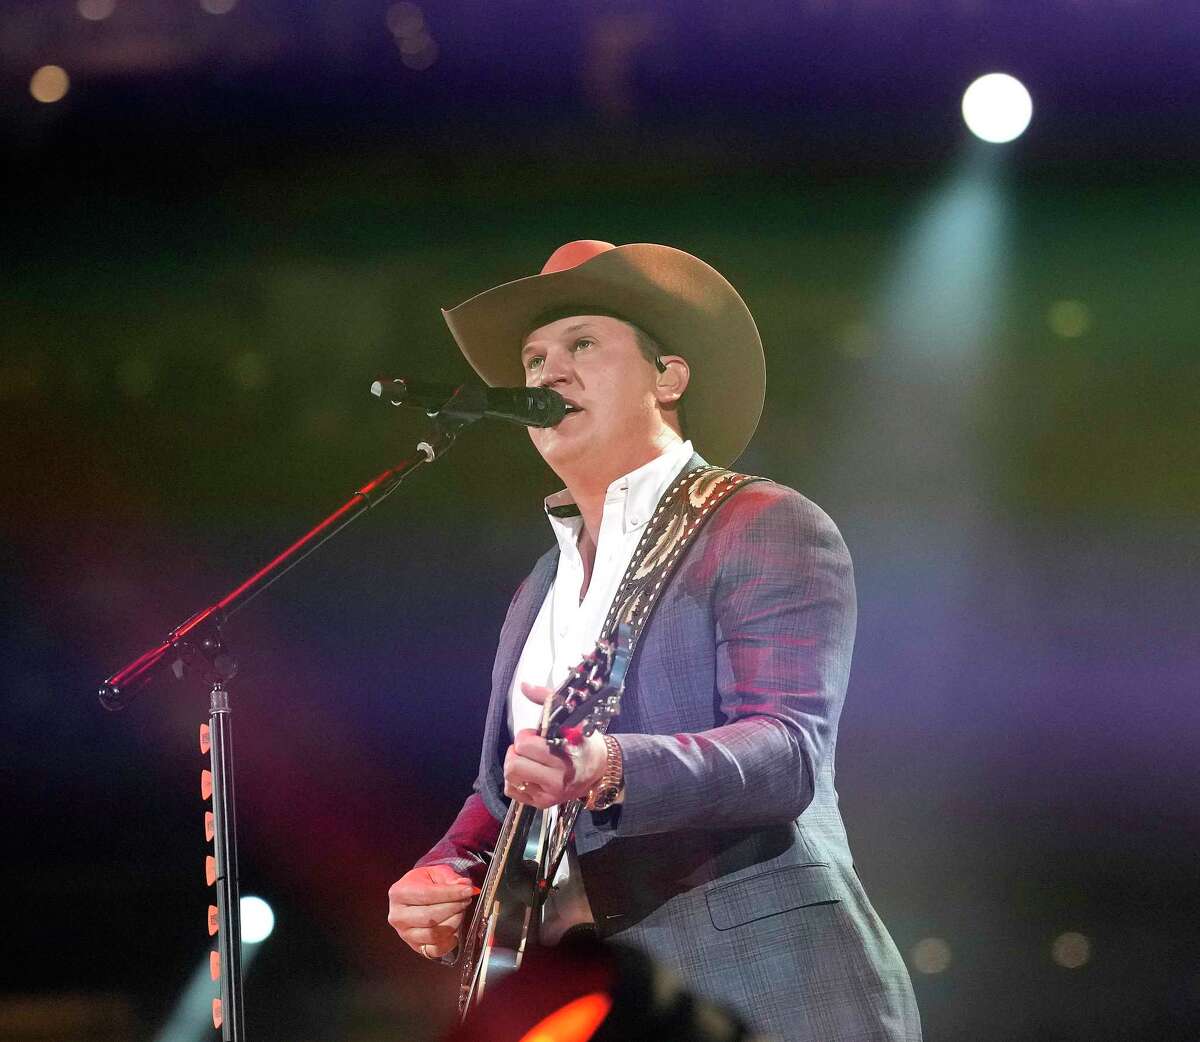 Jon Pardi brings real country back to Houston Rodeo